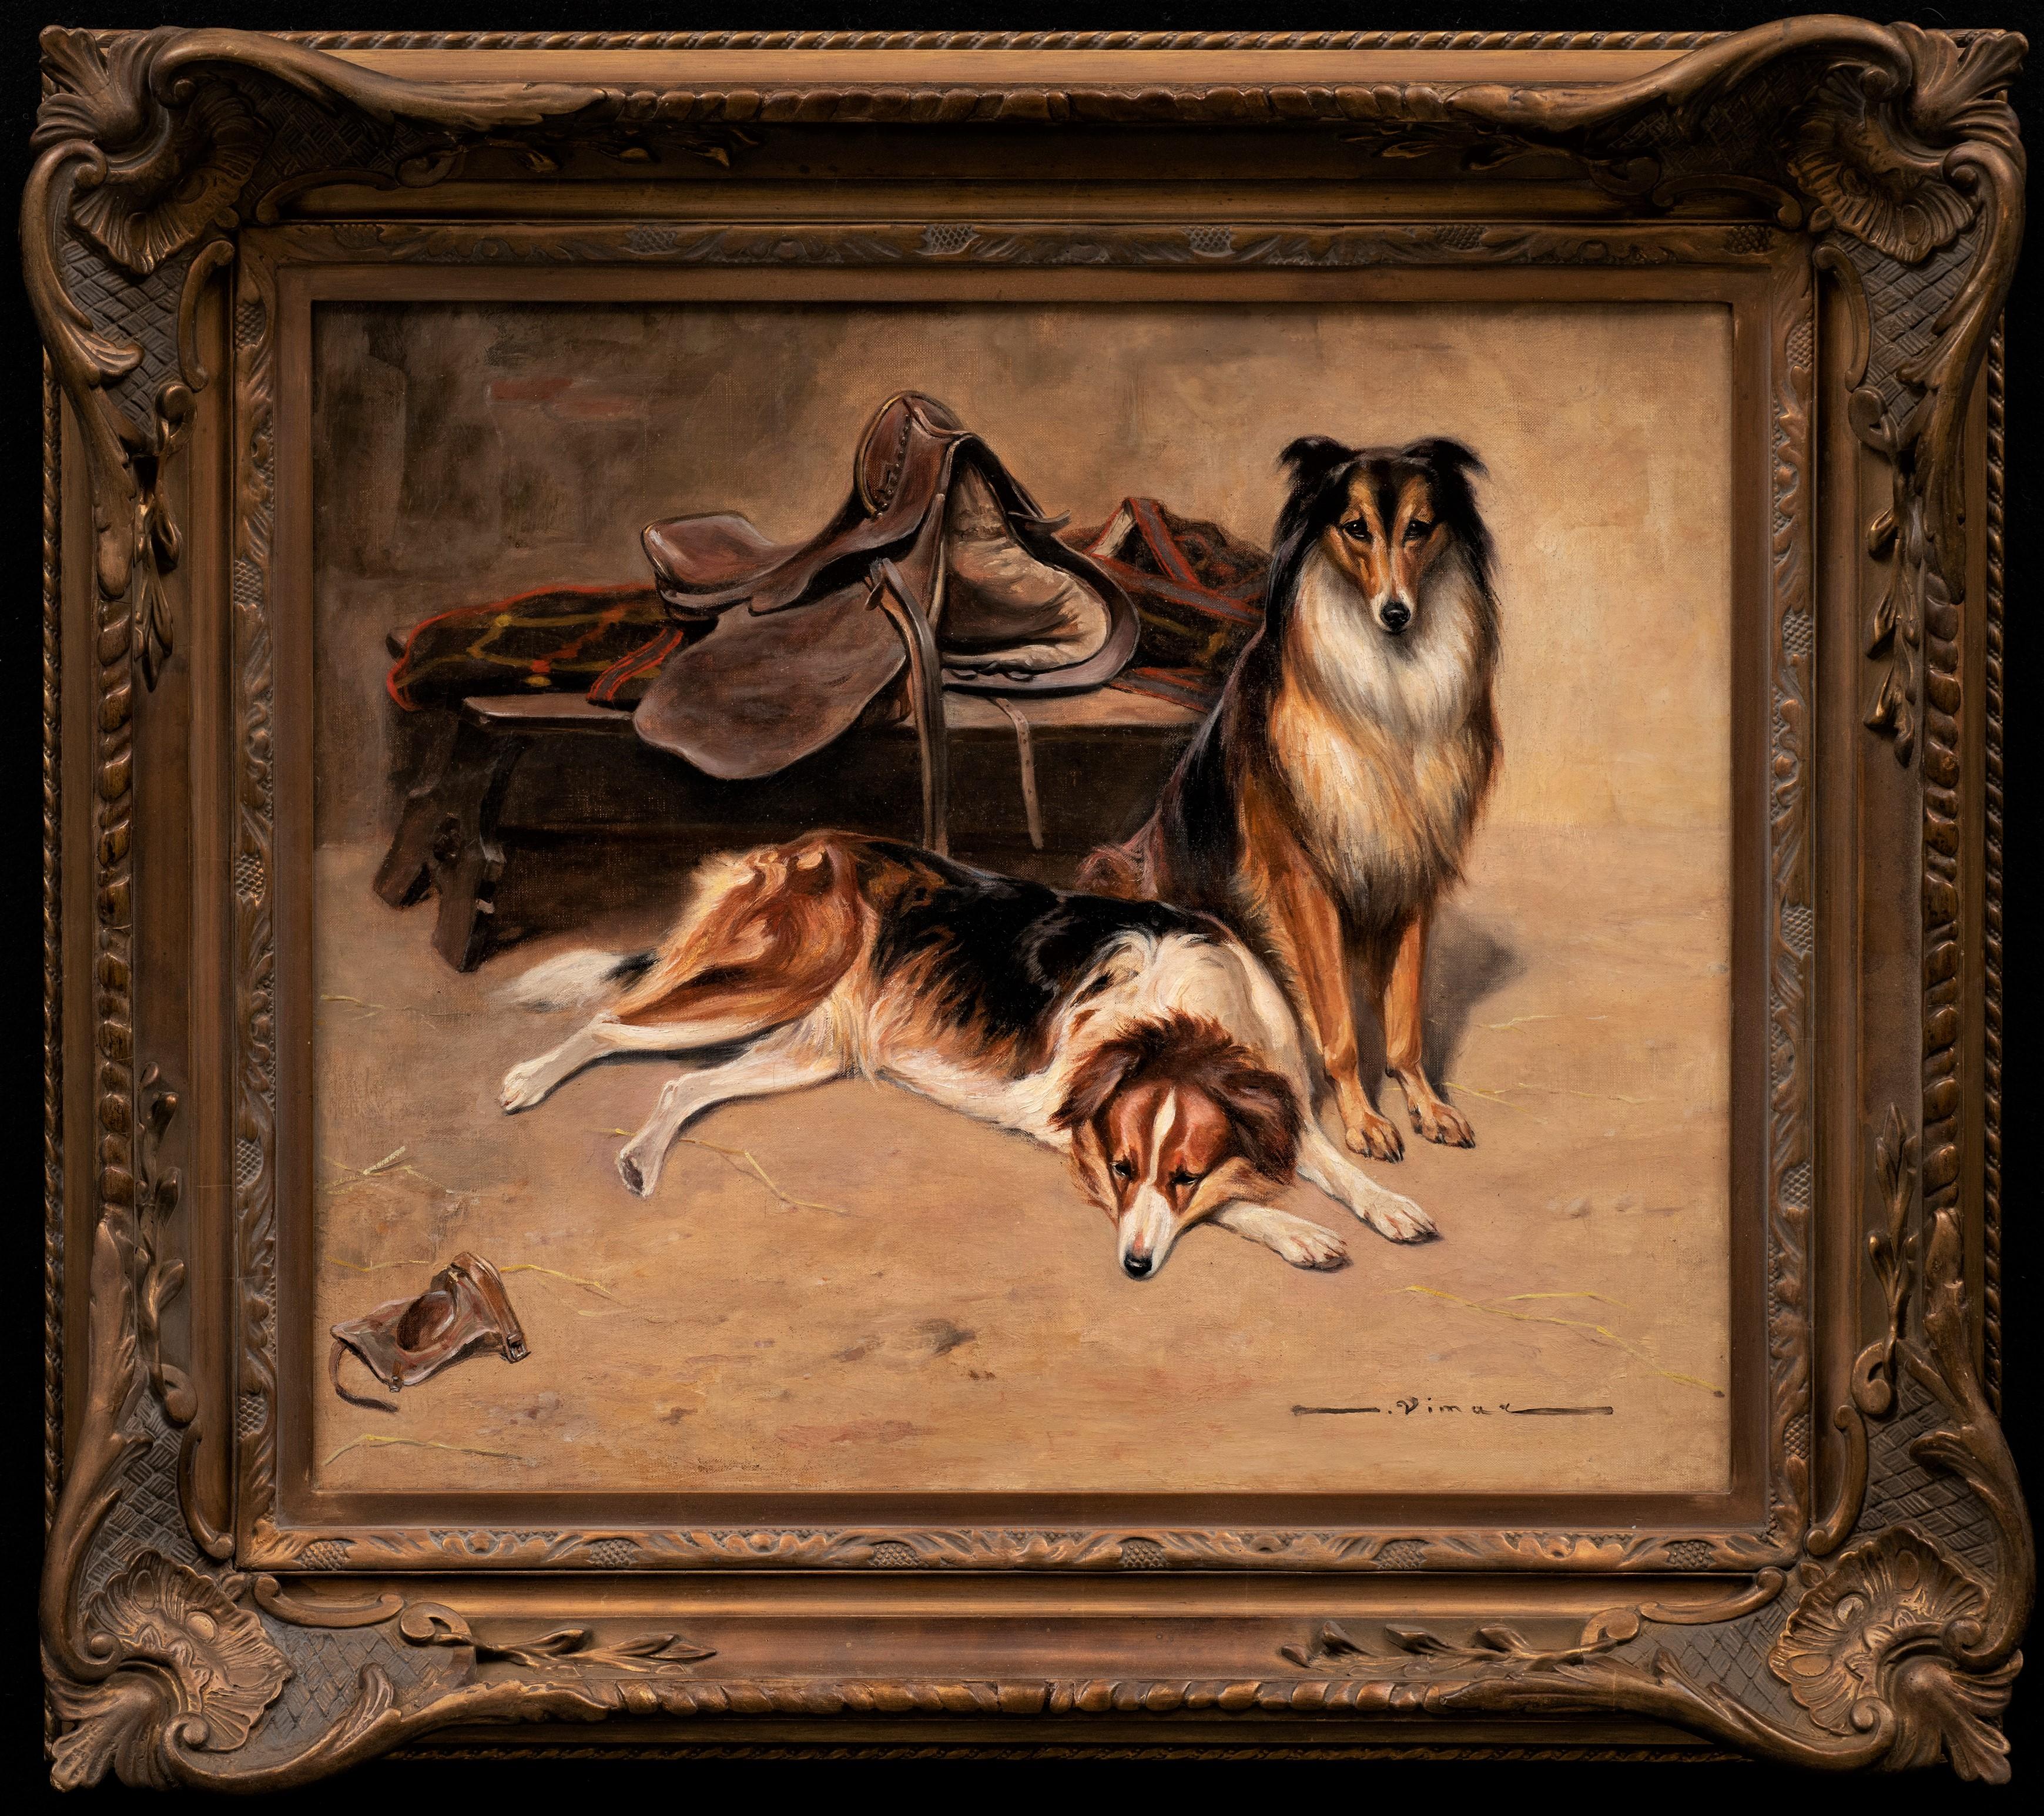 Auguste Vimar  Animal Painting - Antique Dog Painting Collies in Horse Stable w/ Saddle and Blanket, 19th century